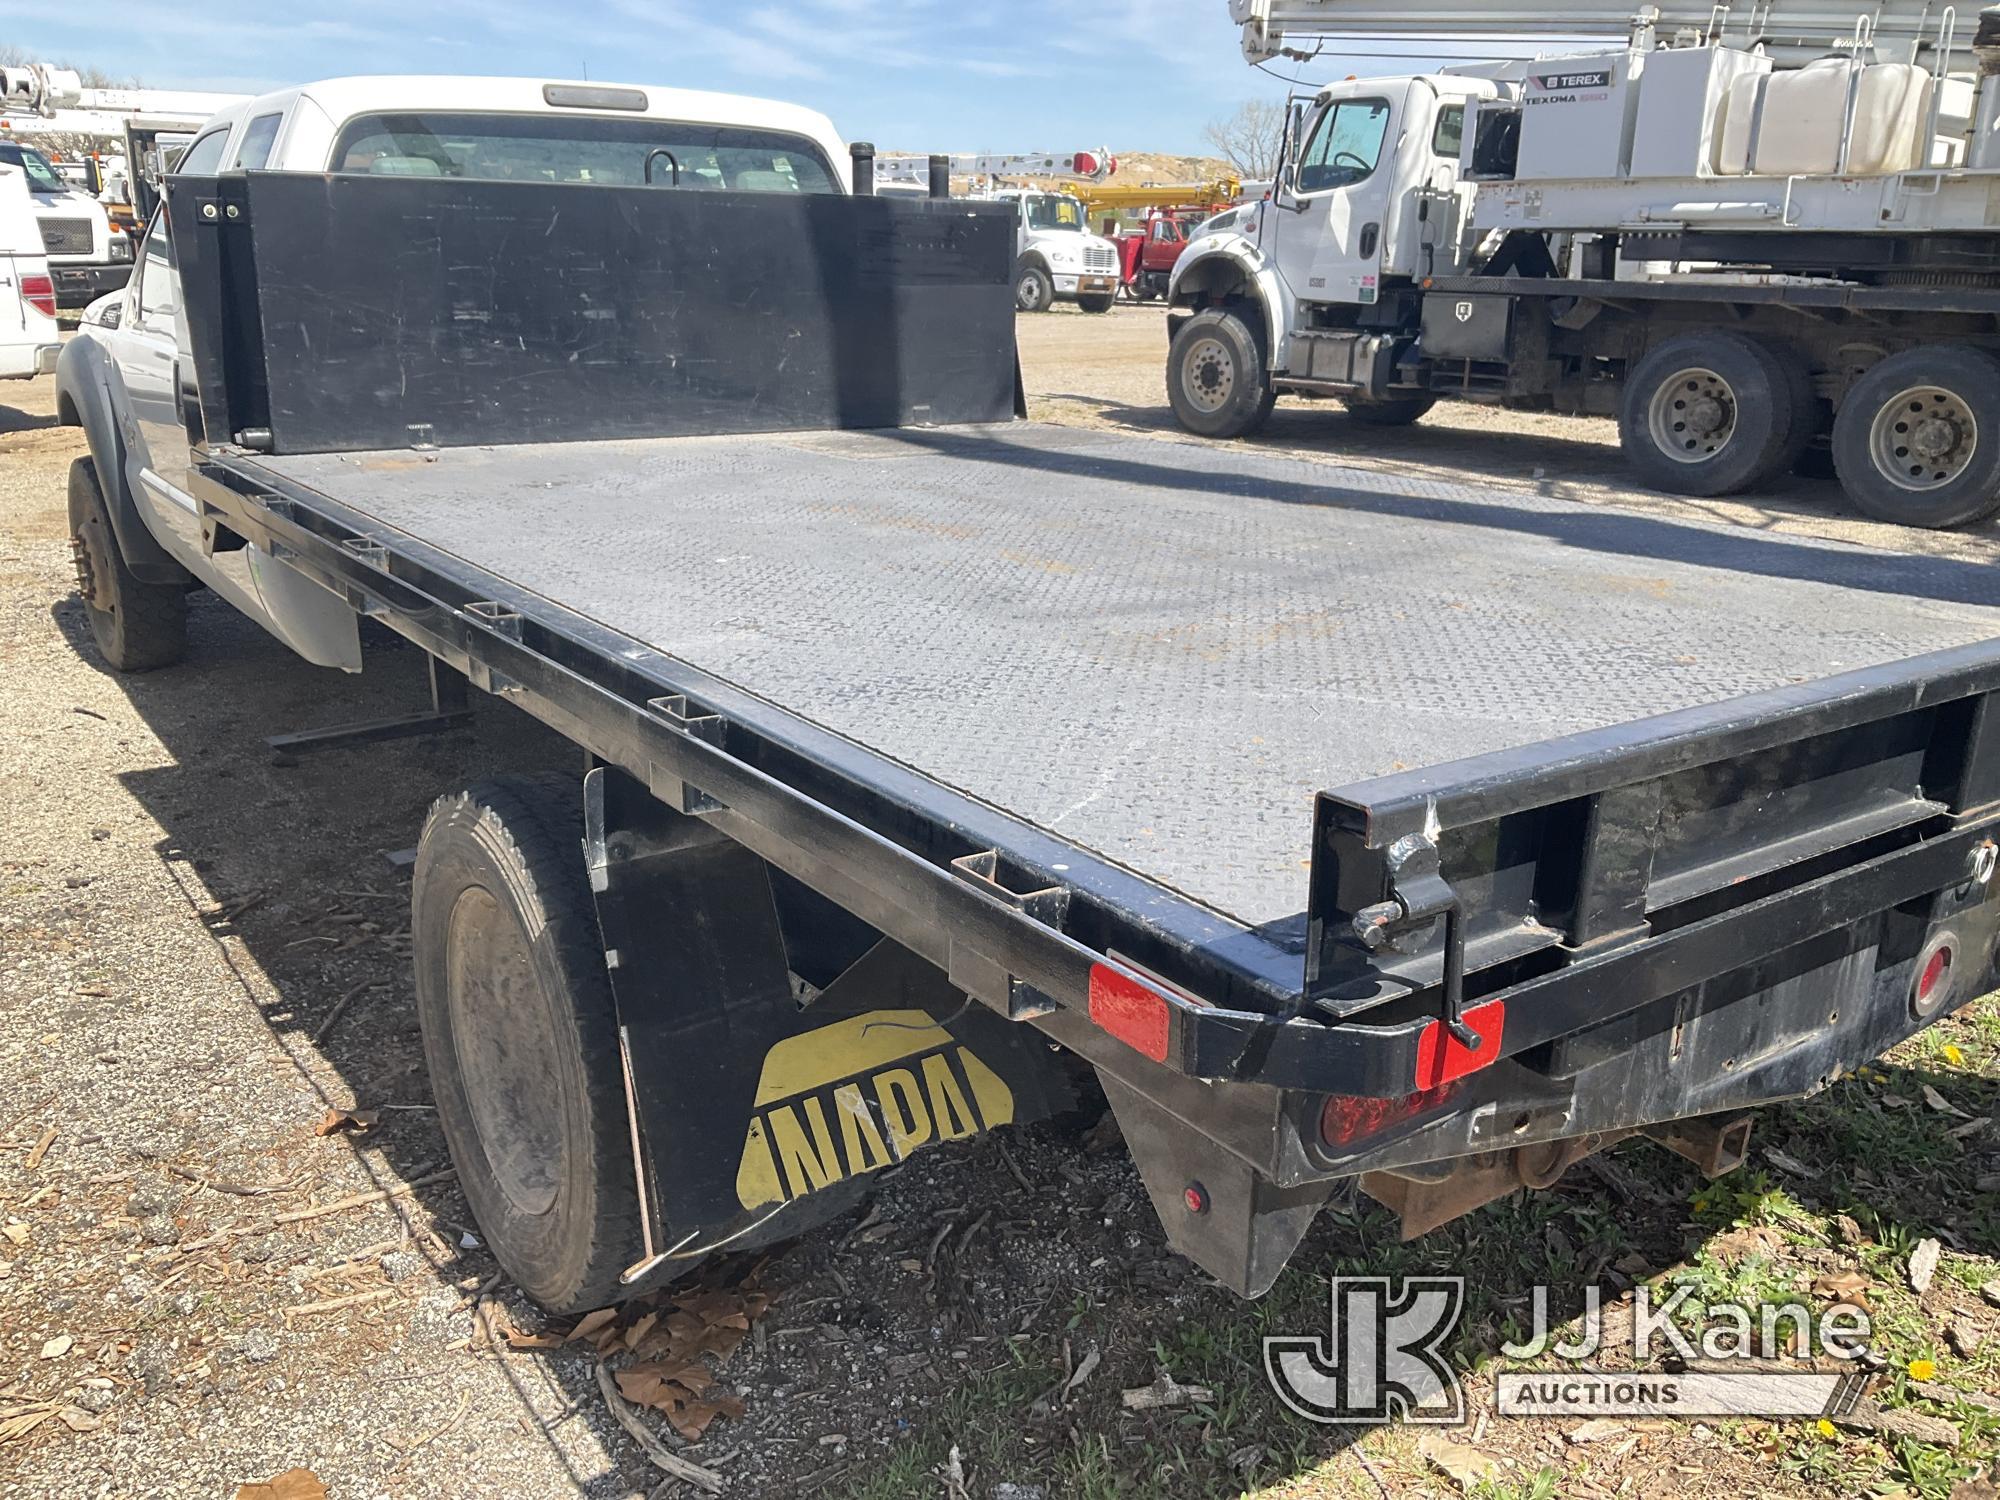 (Kansas City, MO) 2015 Ford F550 4x4 Extended-Cab Flatbed Truck Not Running, Condition Unknown, Has